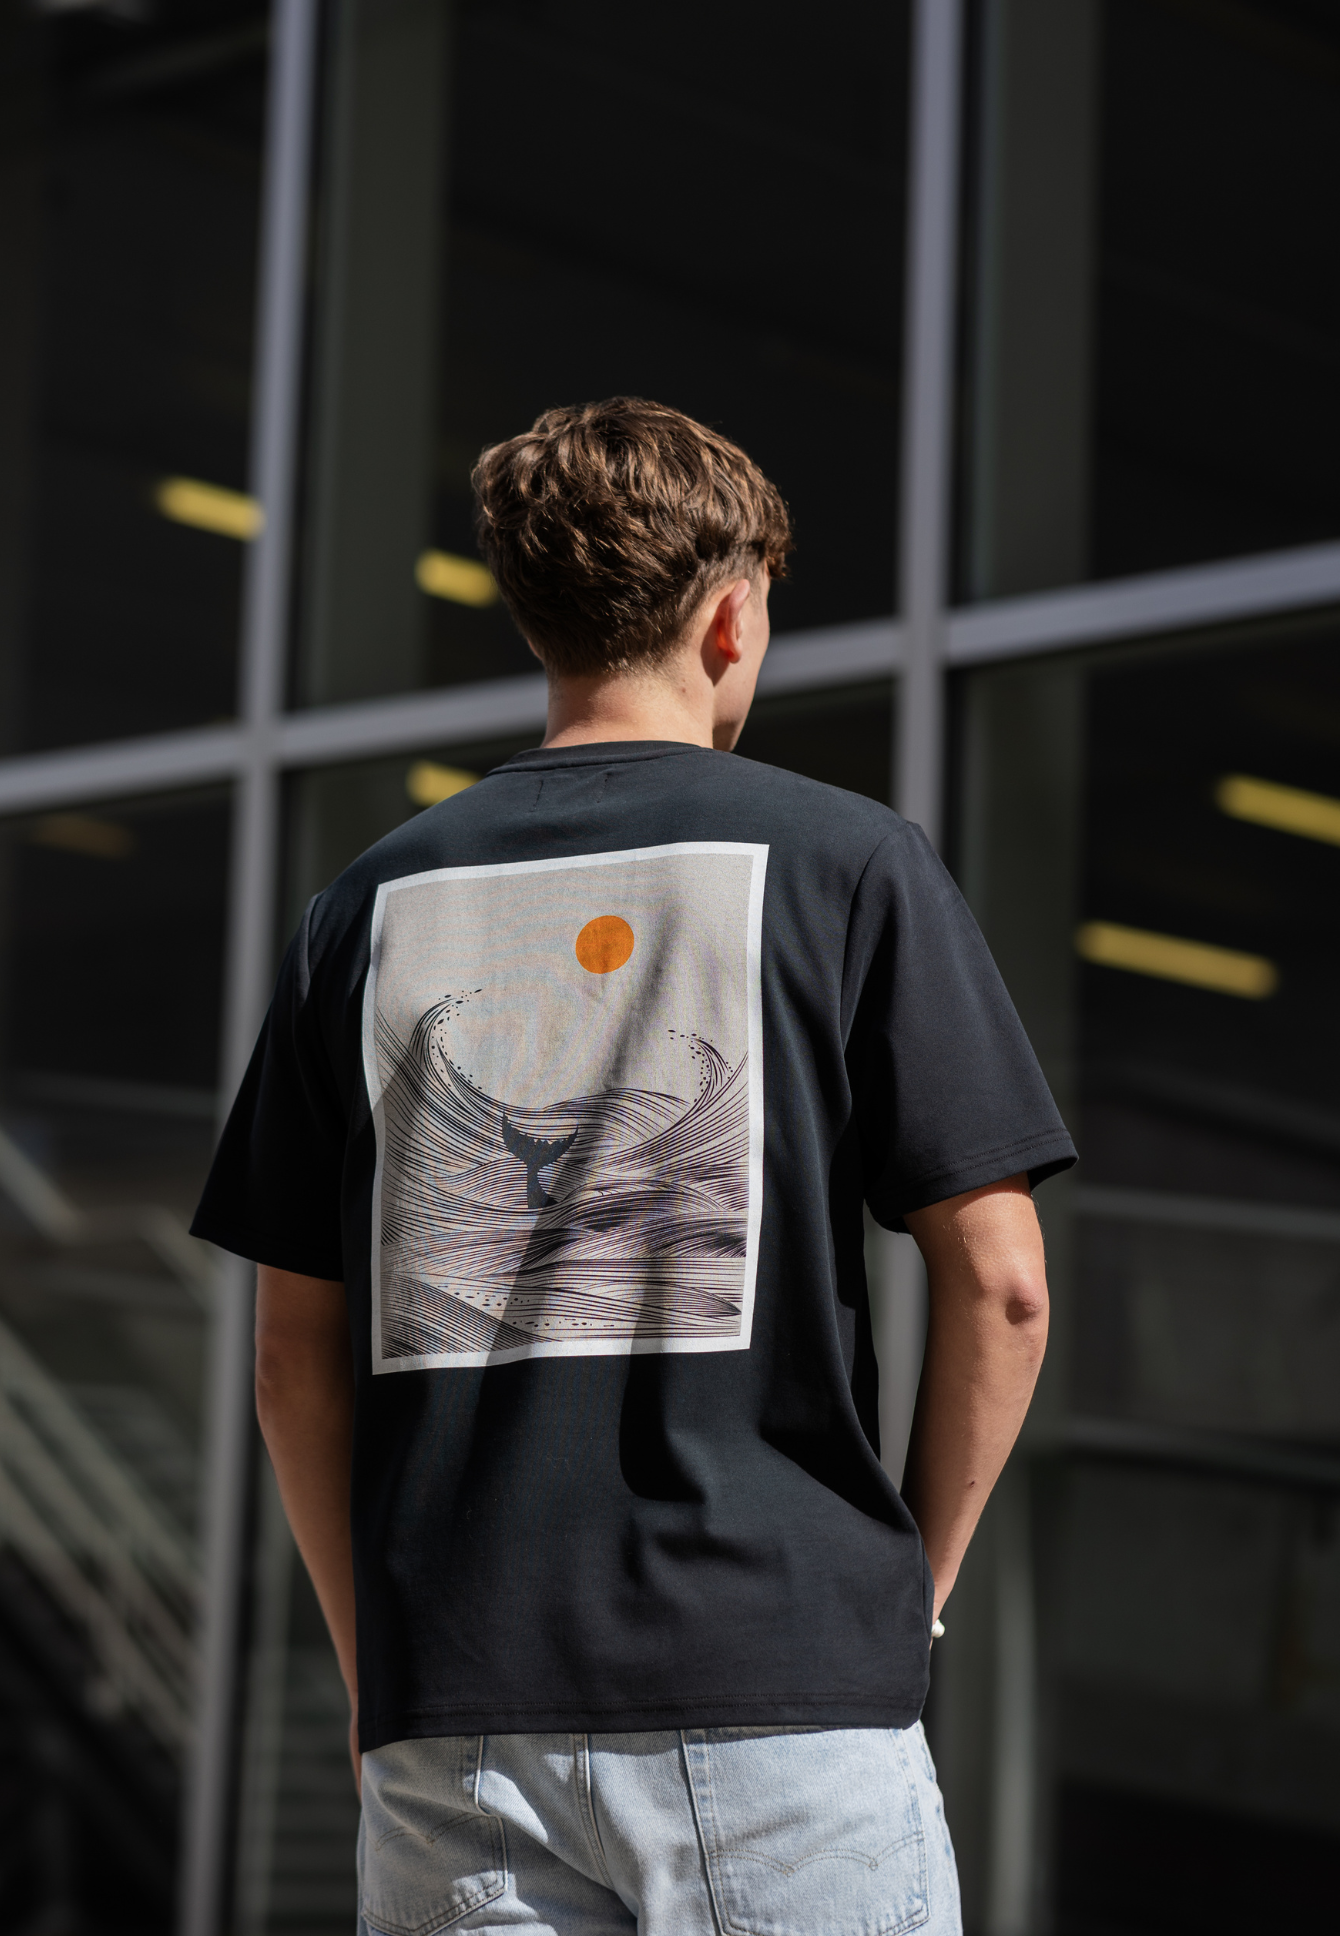 Tale of the Waves - T-shirt